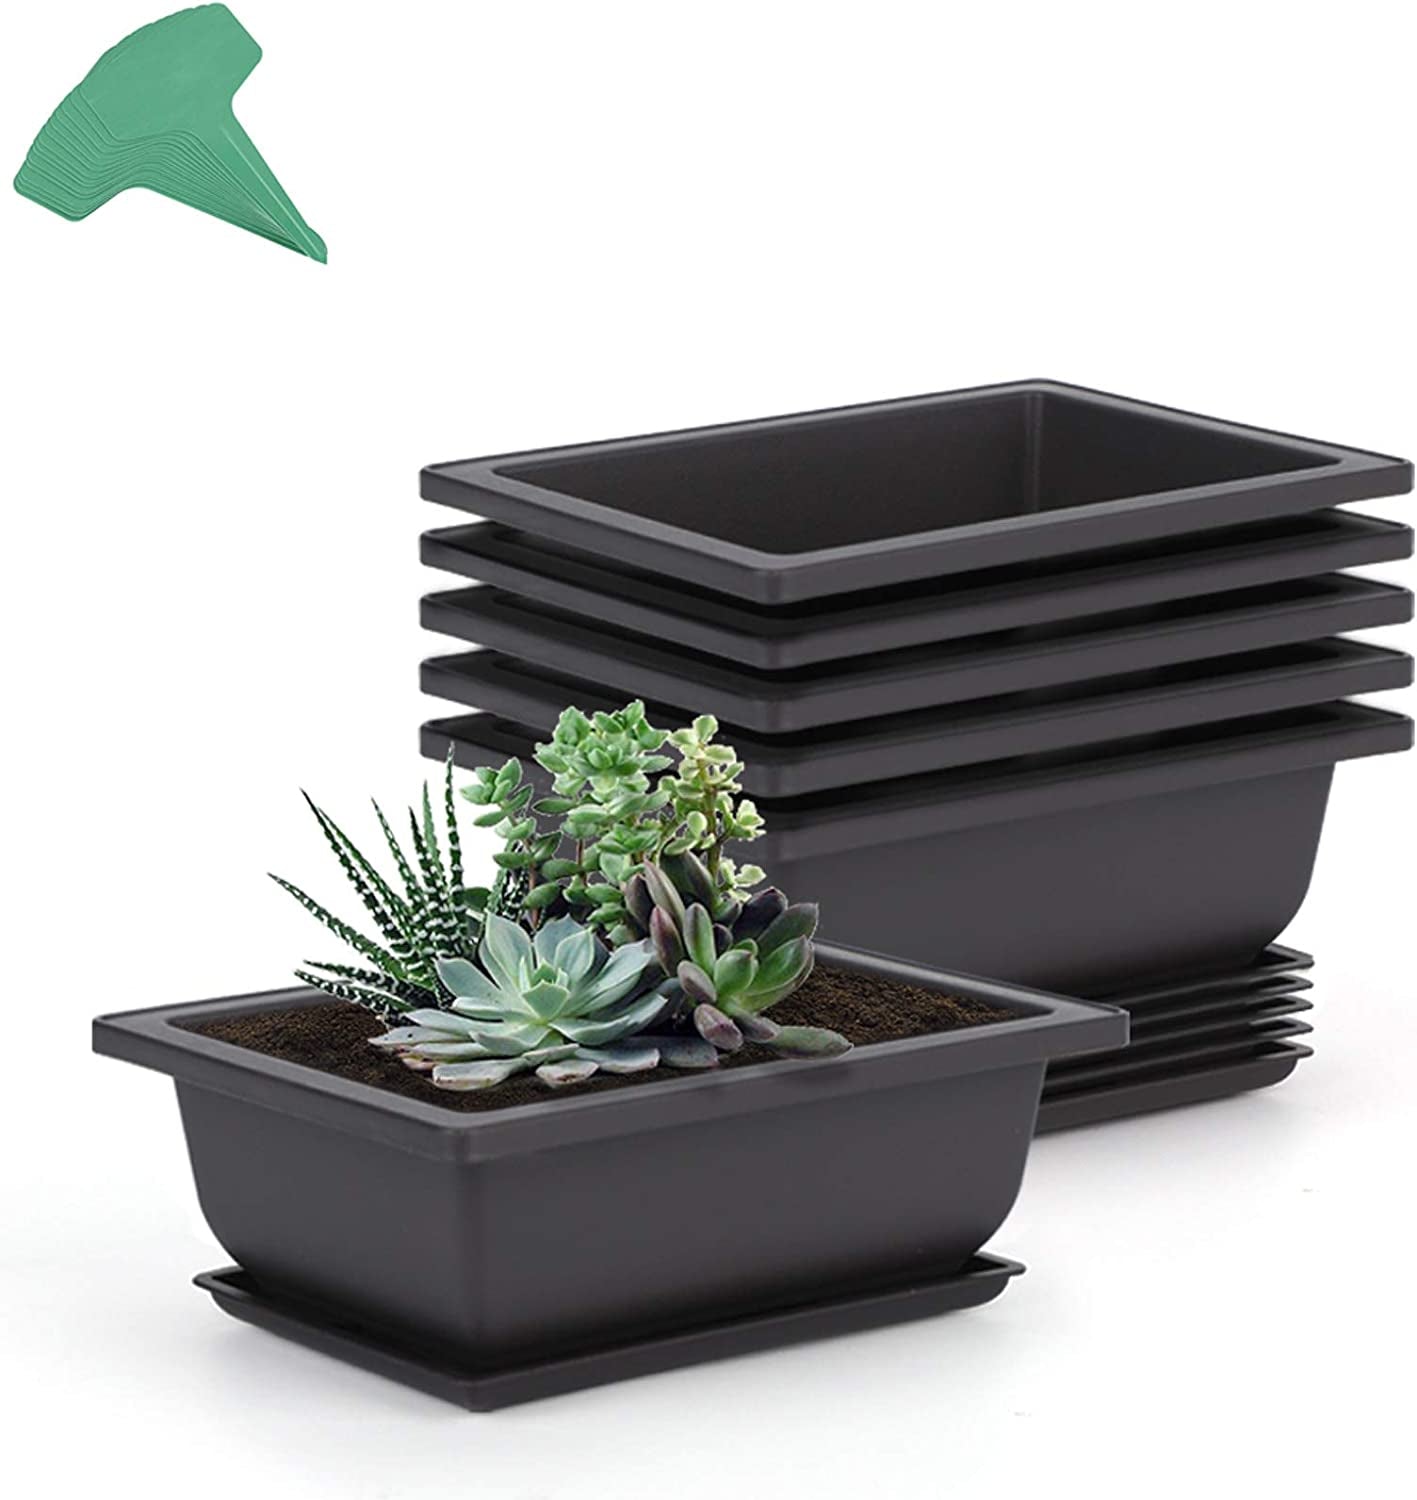 GROWNEER, GROWNEER 6 Packs 6.5 Inches Bonsai Training Pots with 15 Pcs Plant Labels, Plastic Bonsai Plants Growing Pot for Garden, Yard, Office, Living Room, Balcony and More